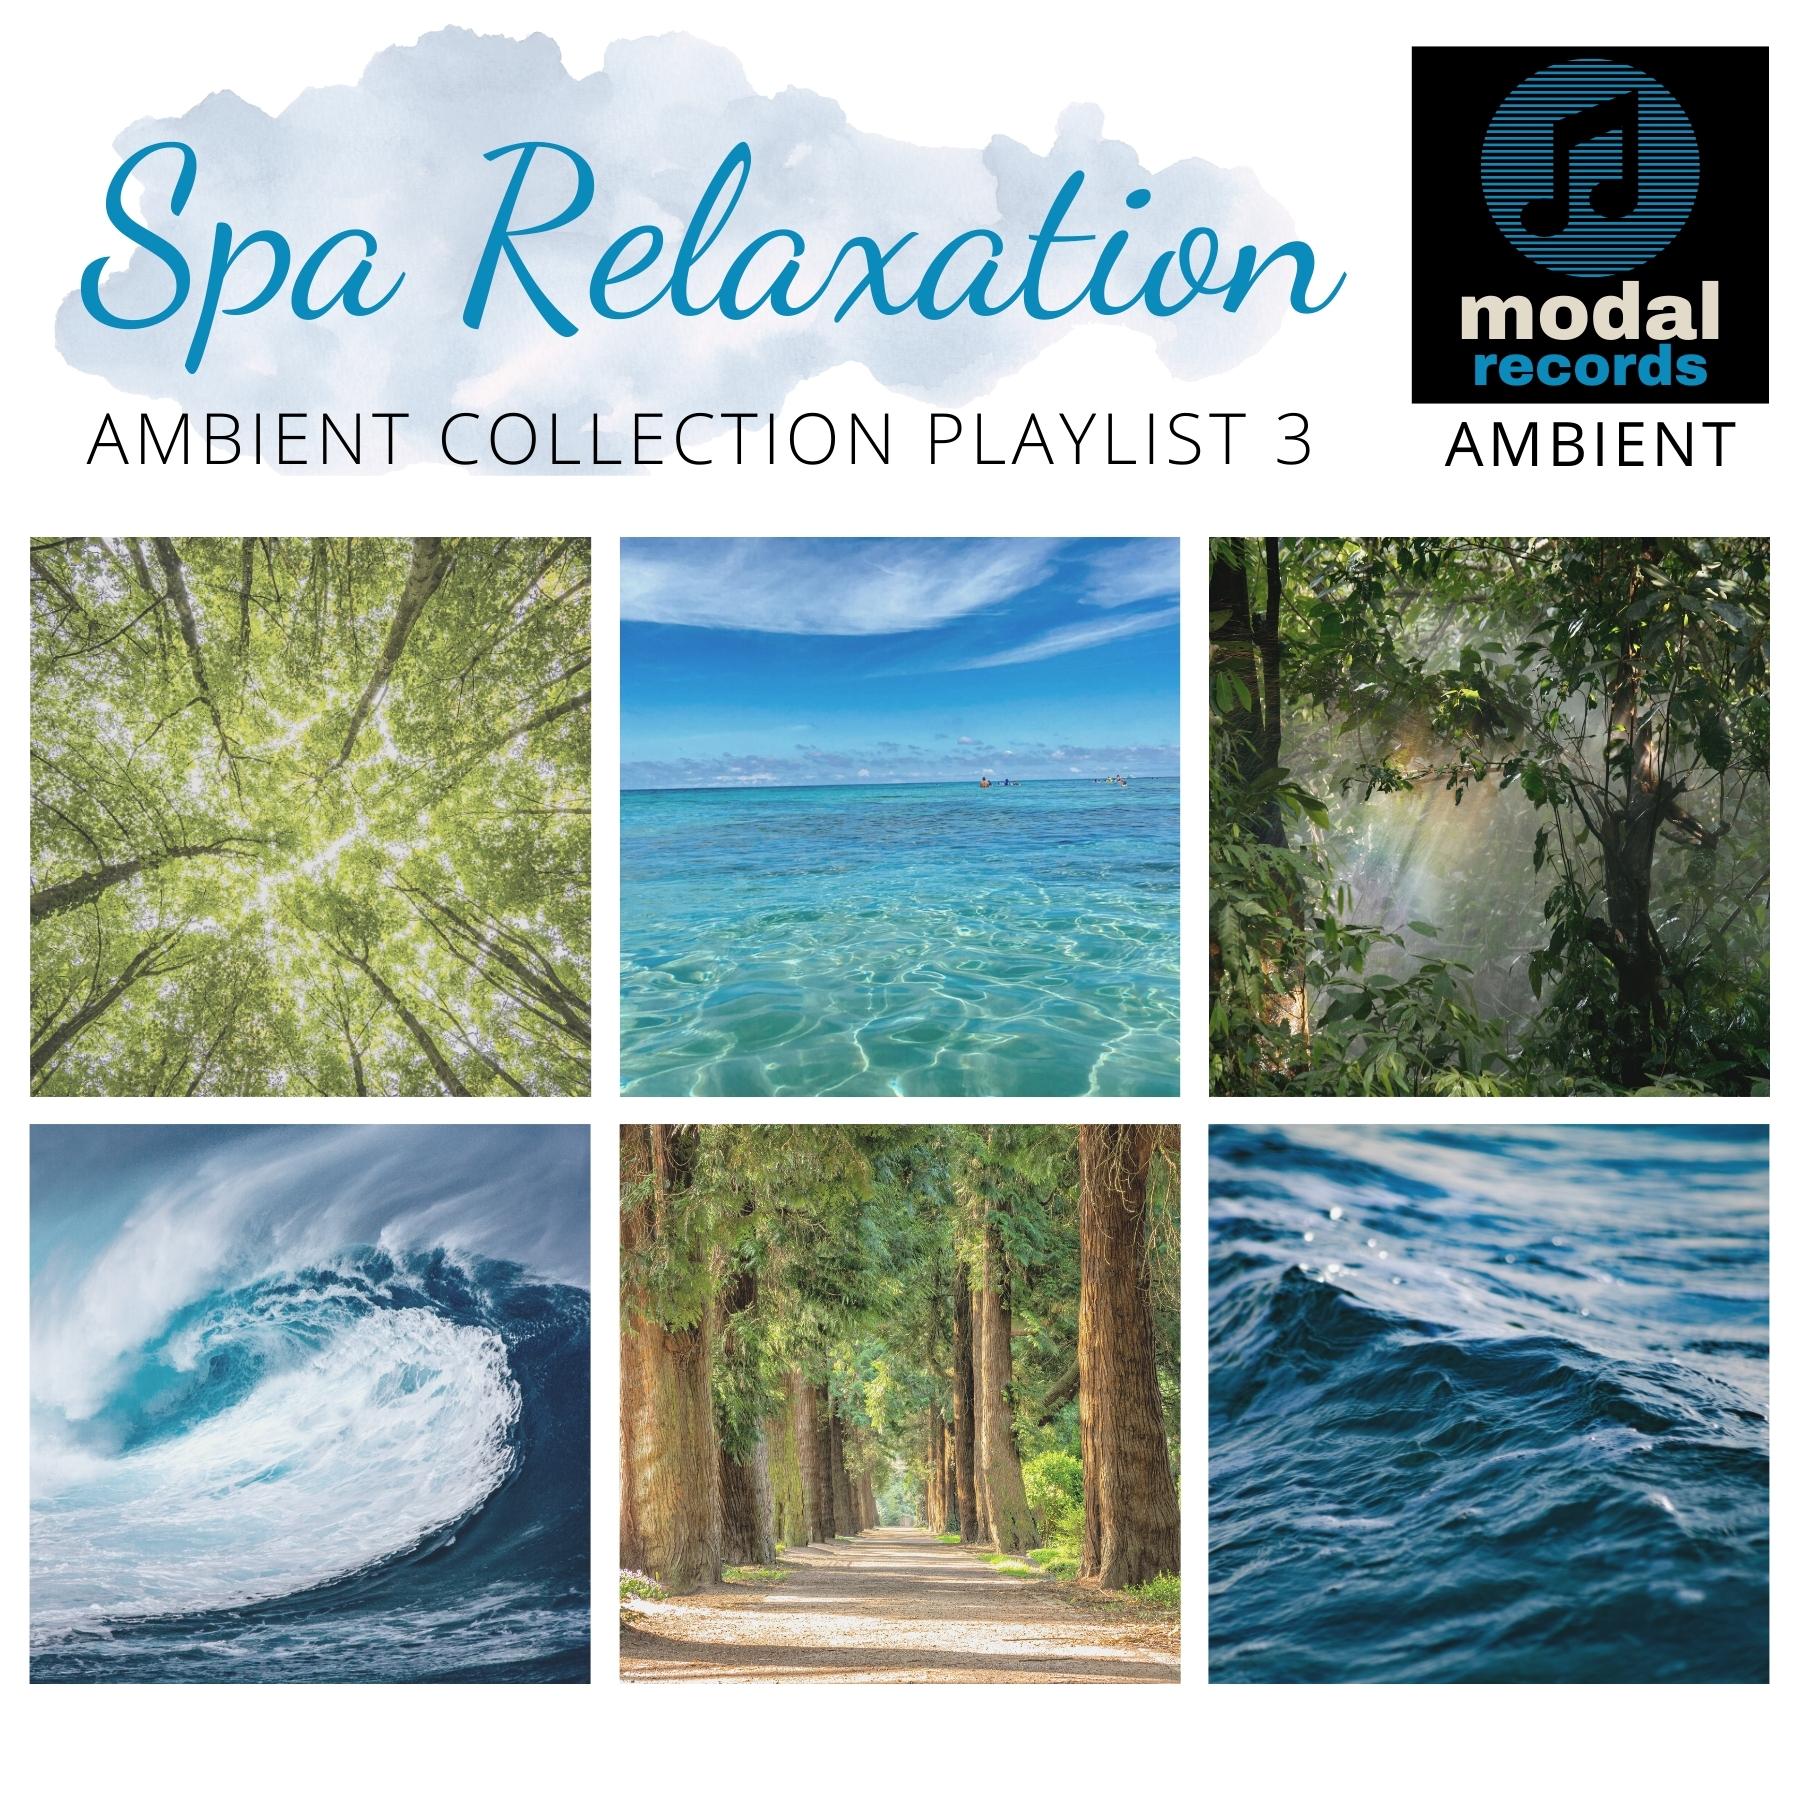 Modal Ambient Playlist - Spa Relaxation - Ambient Collection 3